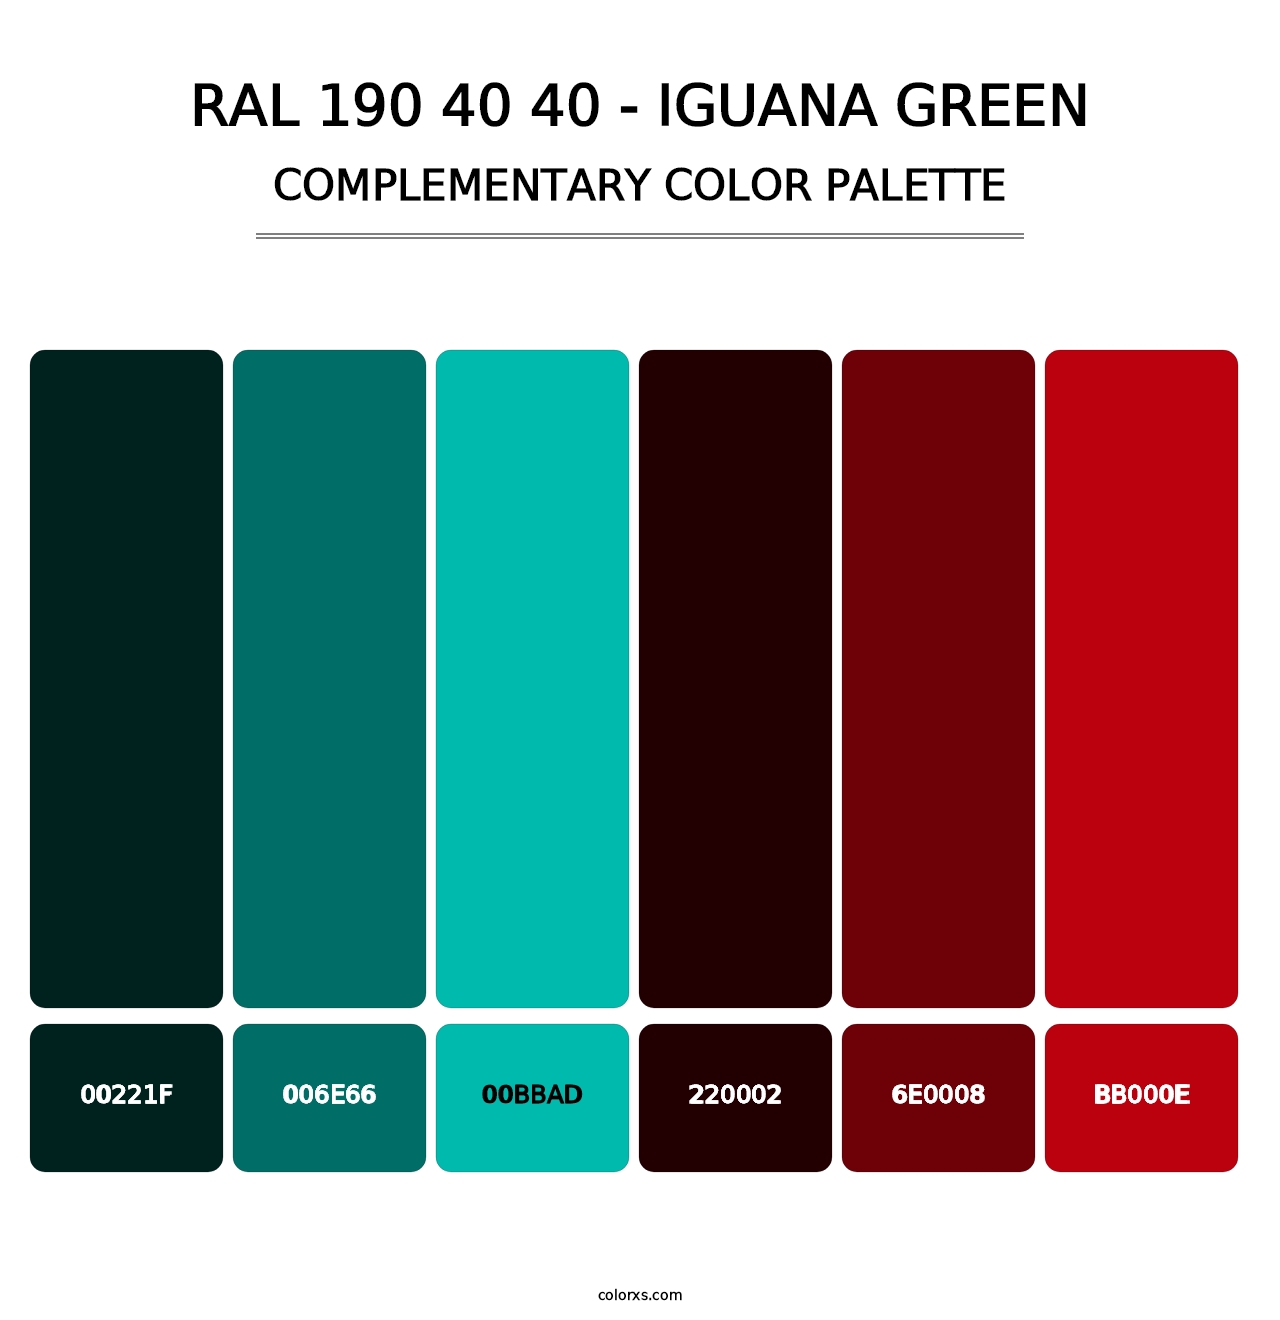 RAL 190 40 40 - Iguana Green - Complementary Color Palette